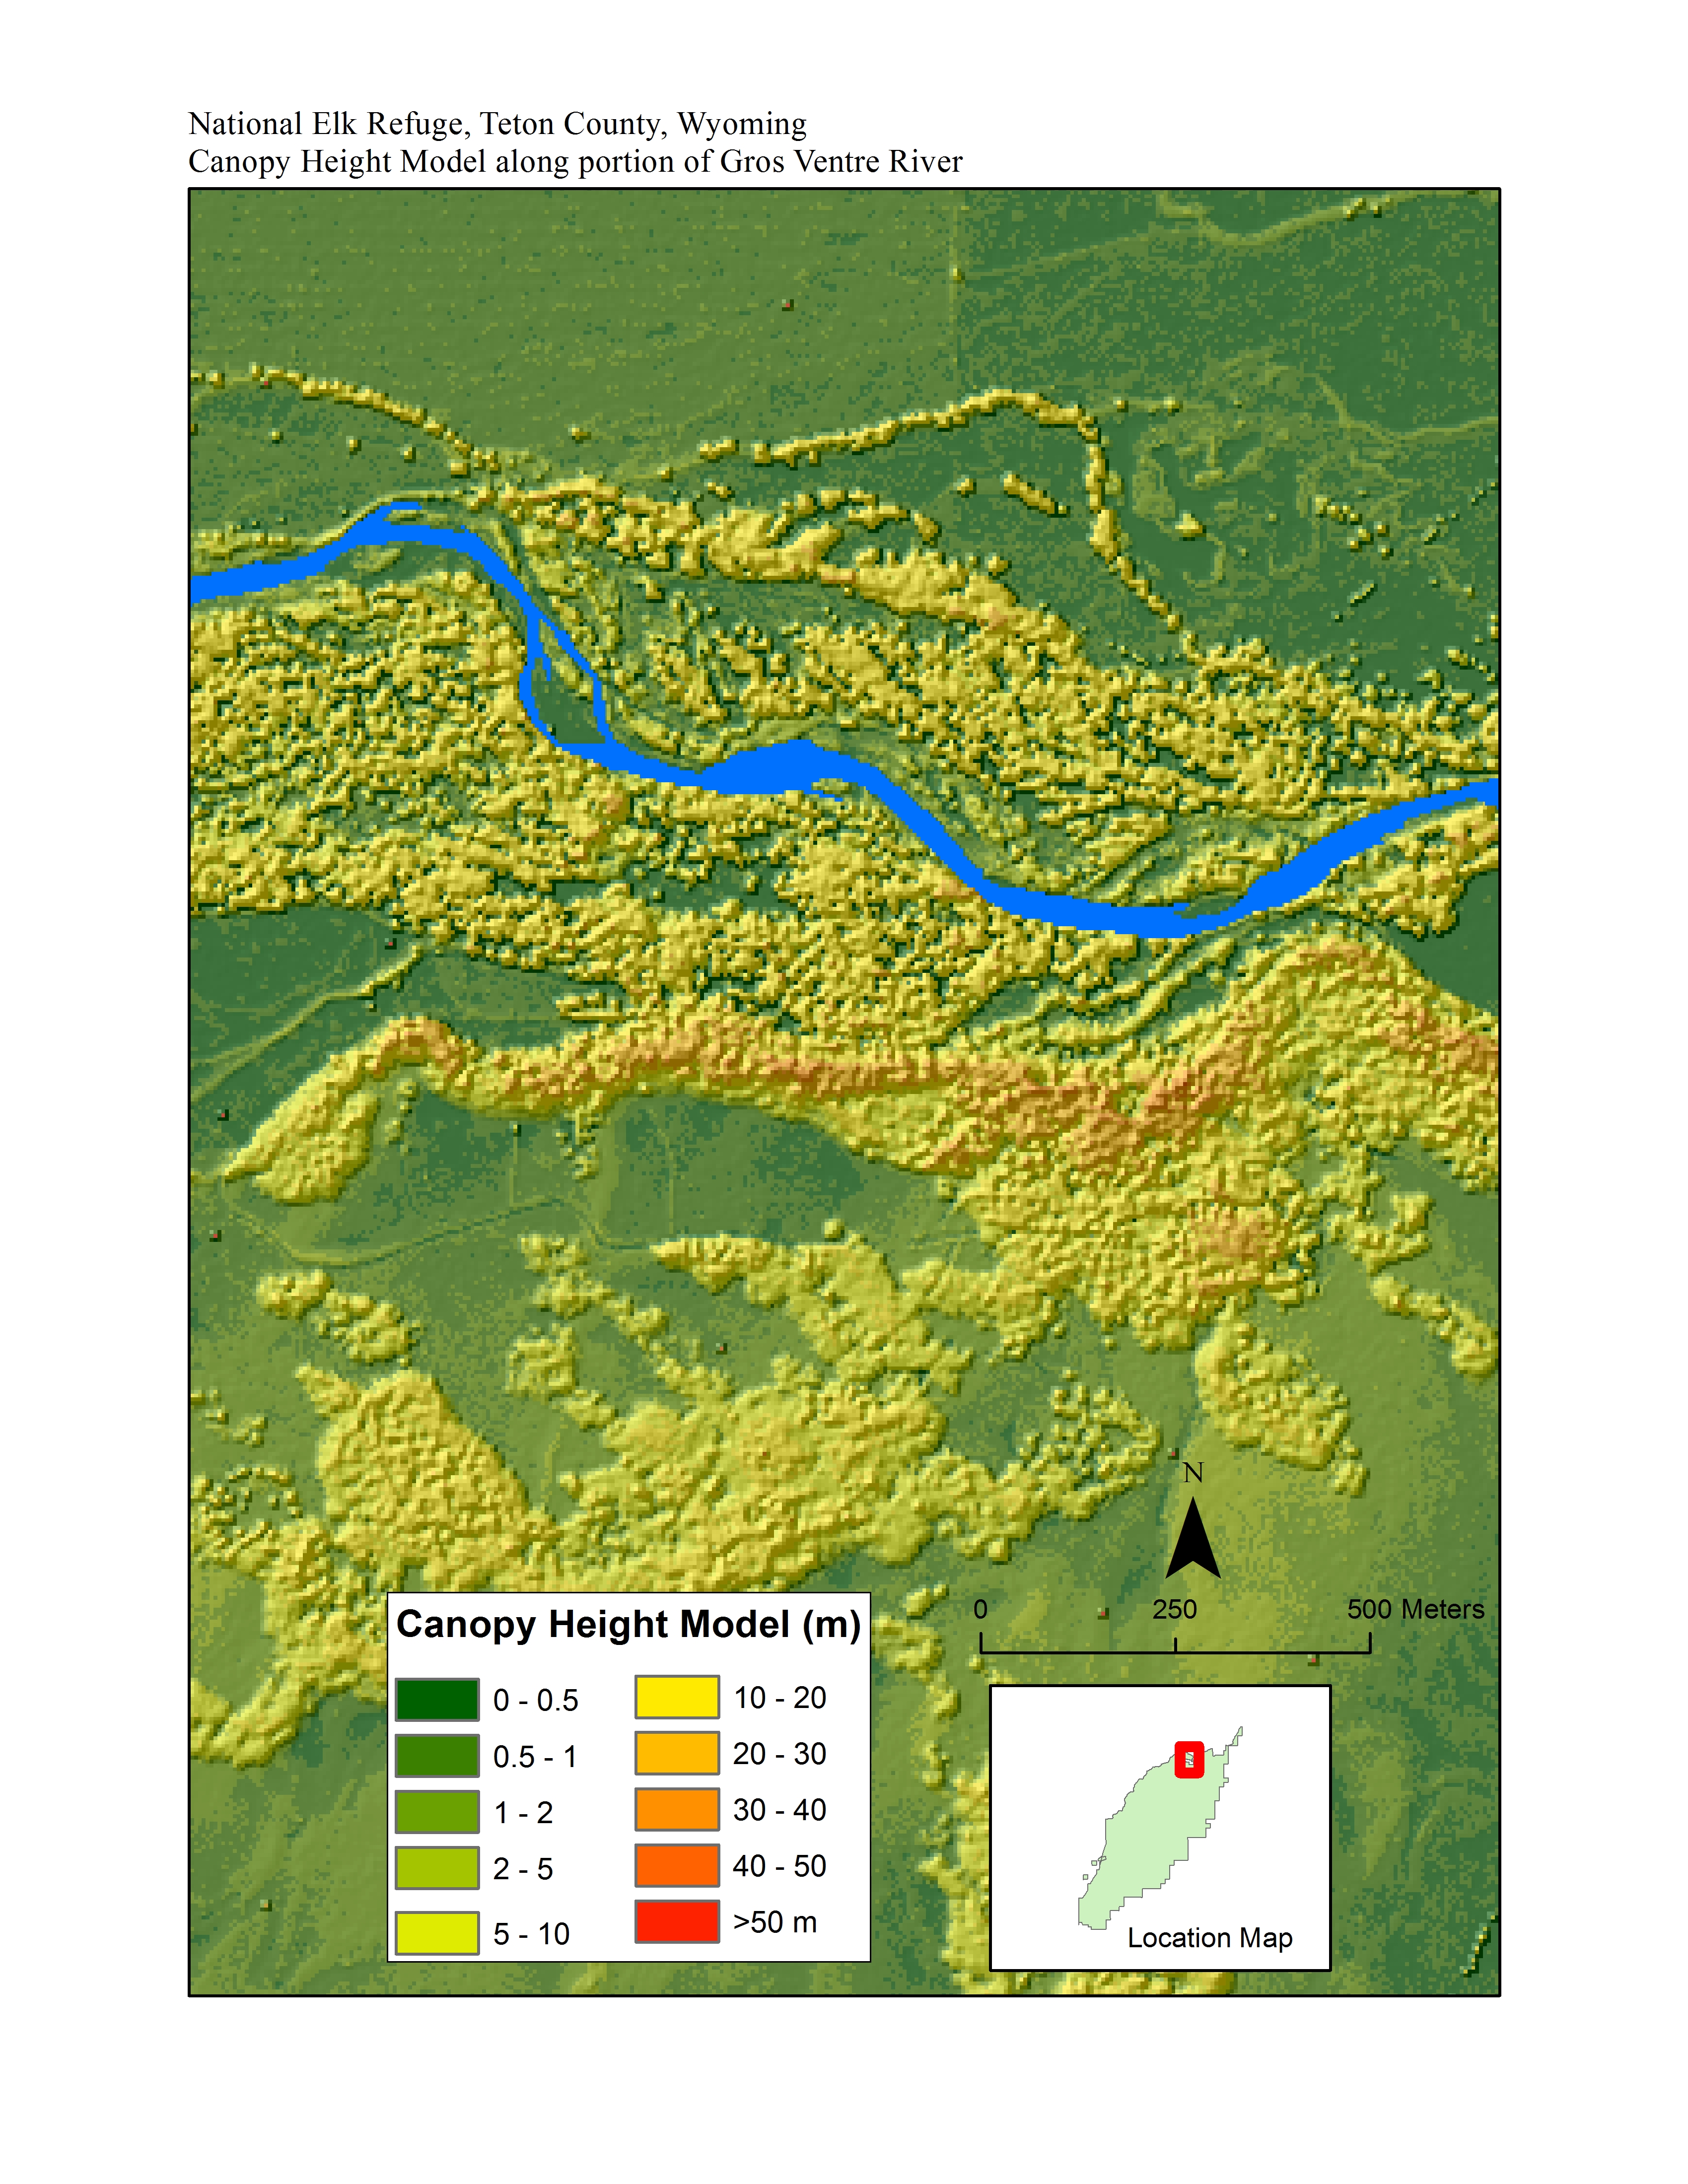 Canopy height model (CHM) developed using first return data for an area along the Gros Ventre River on the north end of the National Elk Refuge.